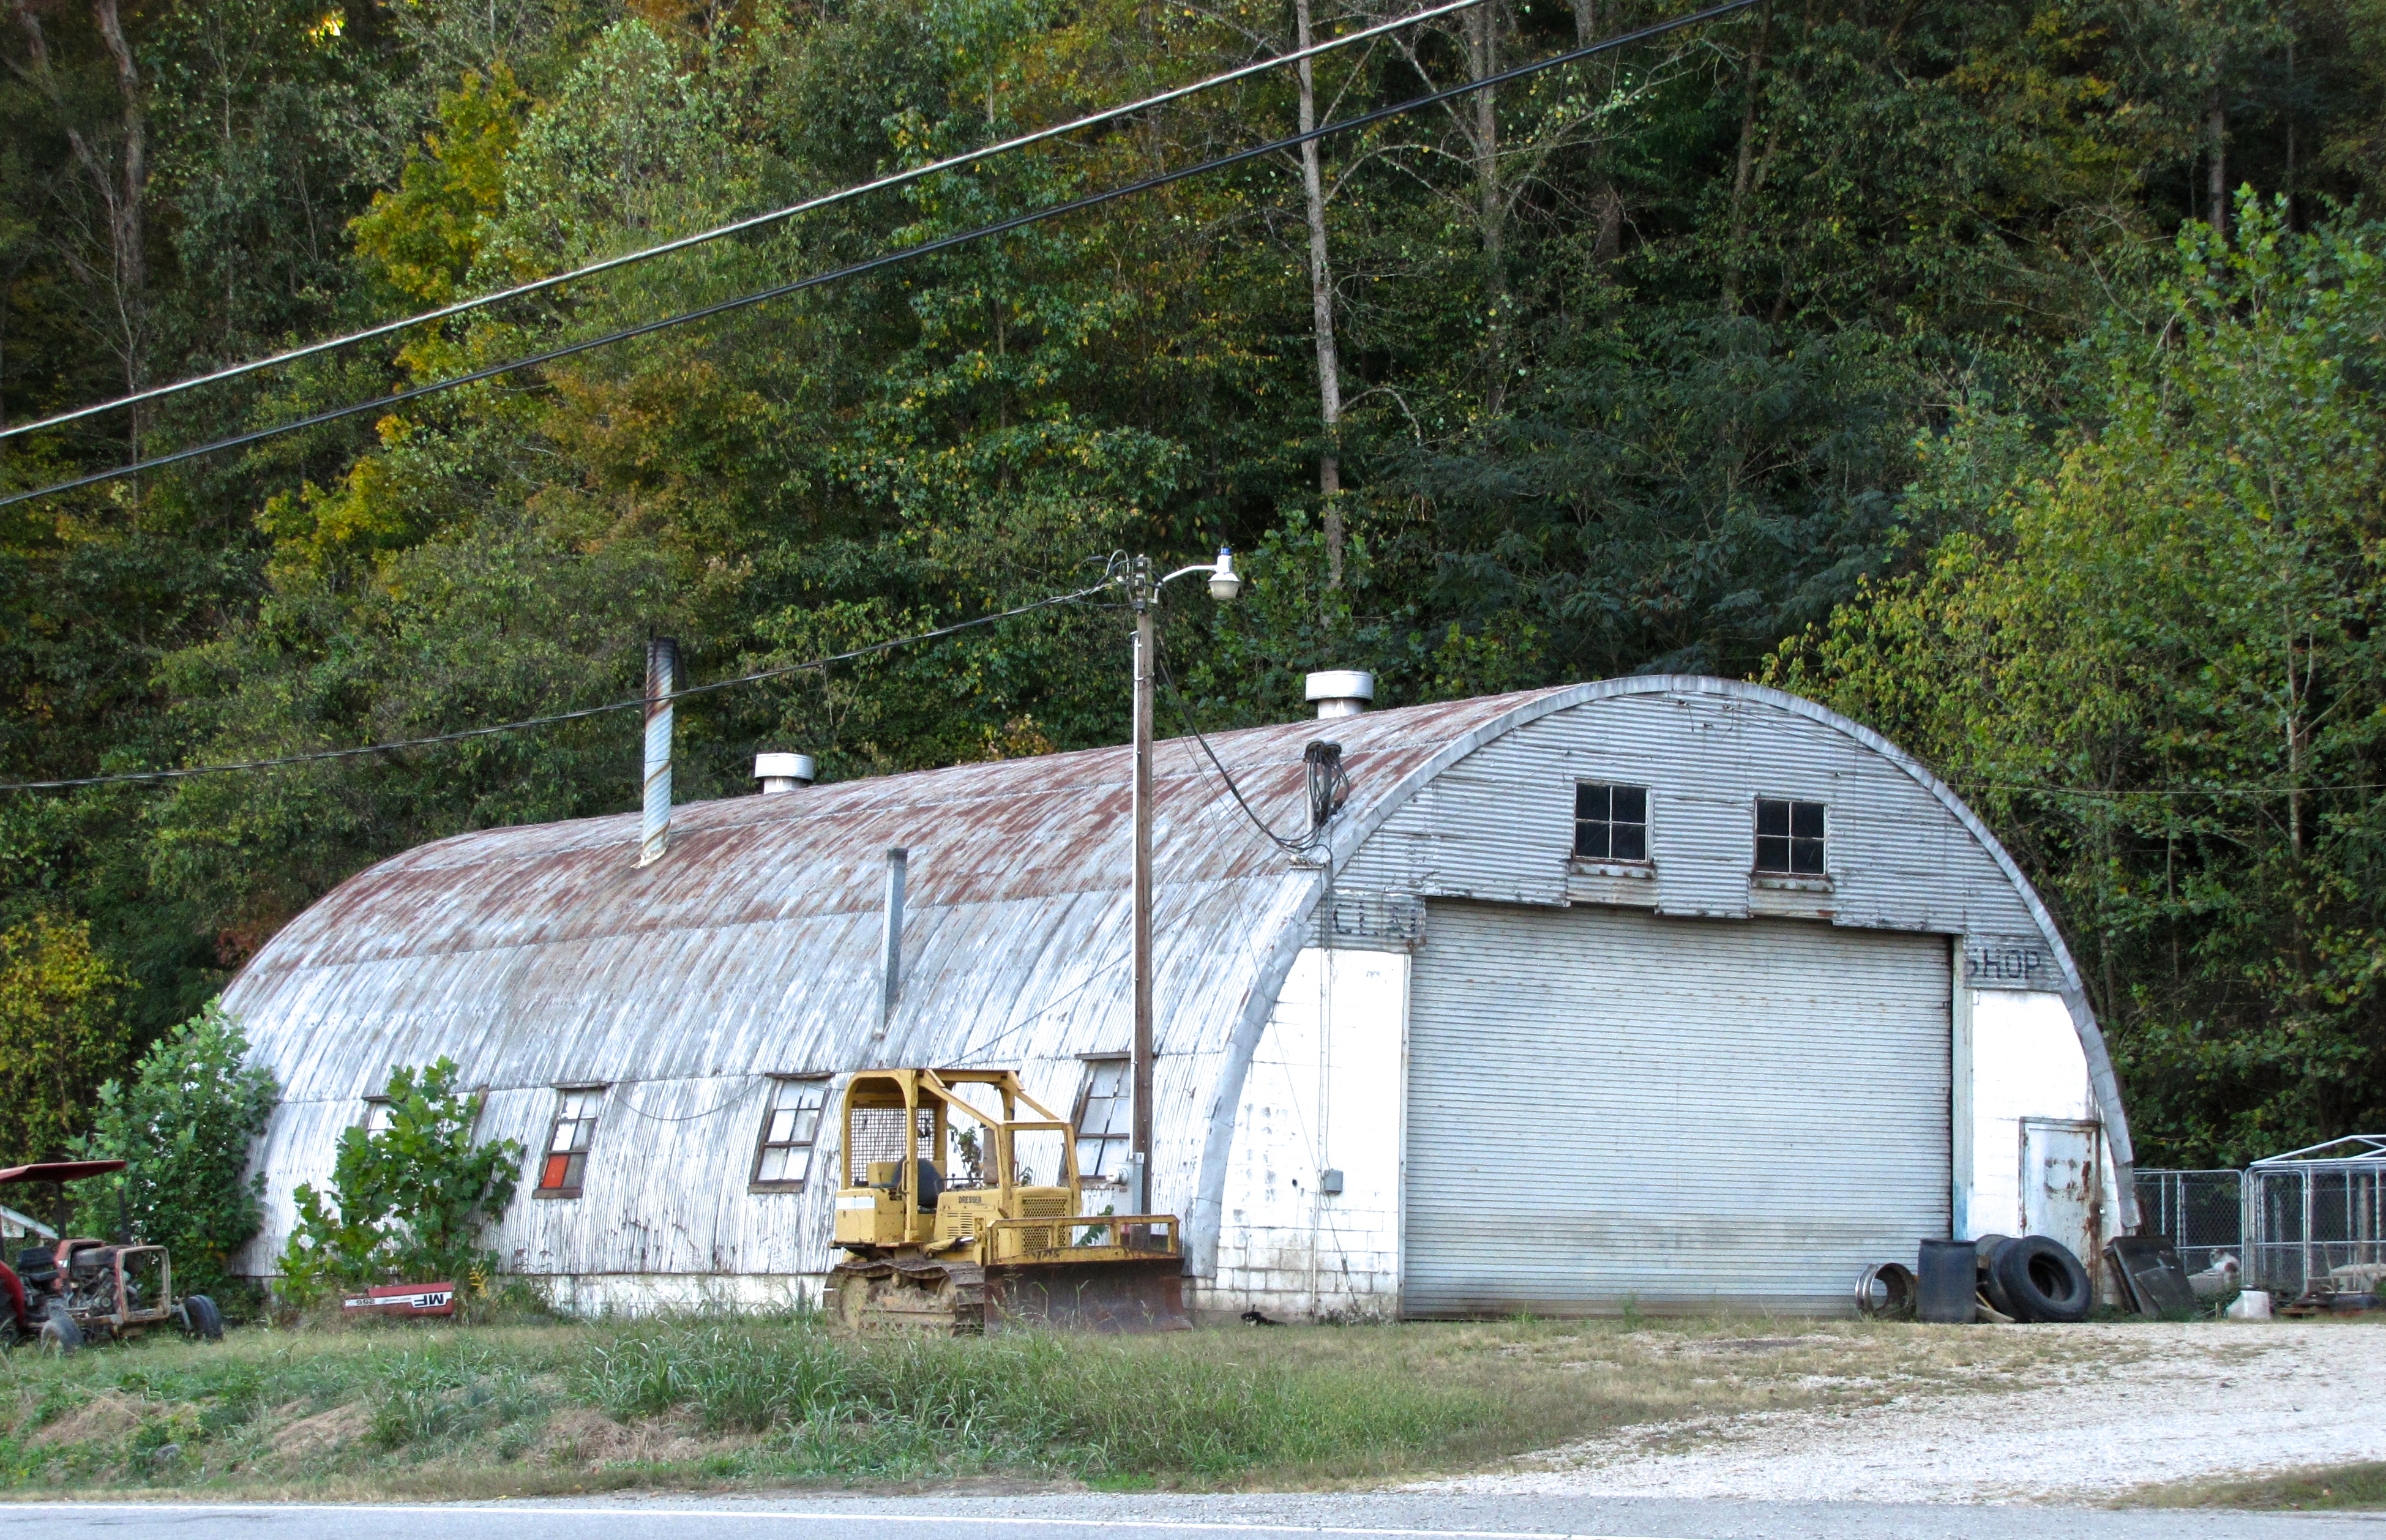 quonset hut in Cary, NC